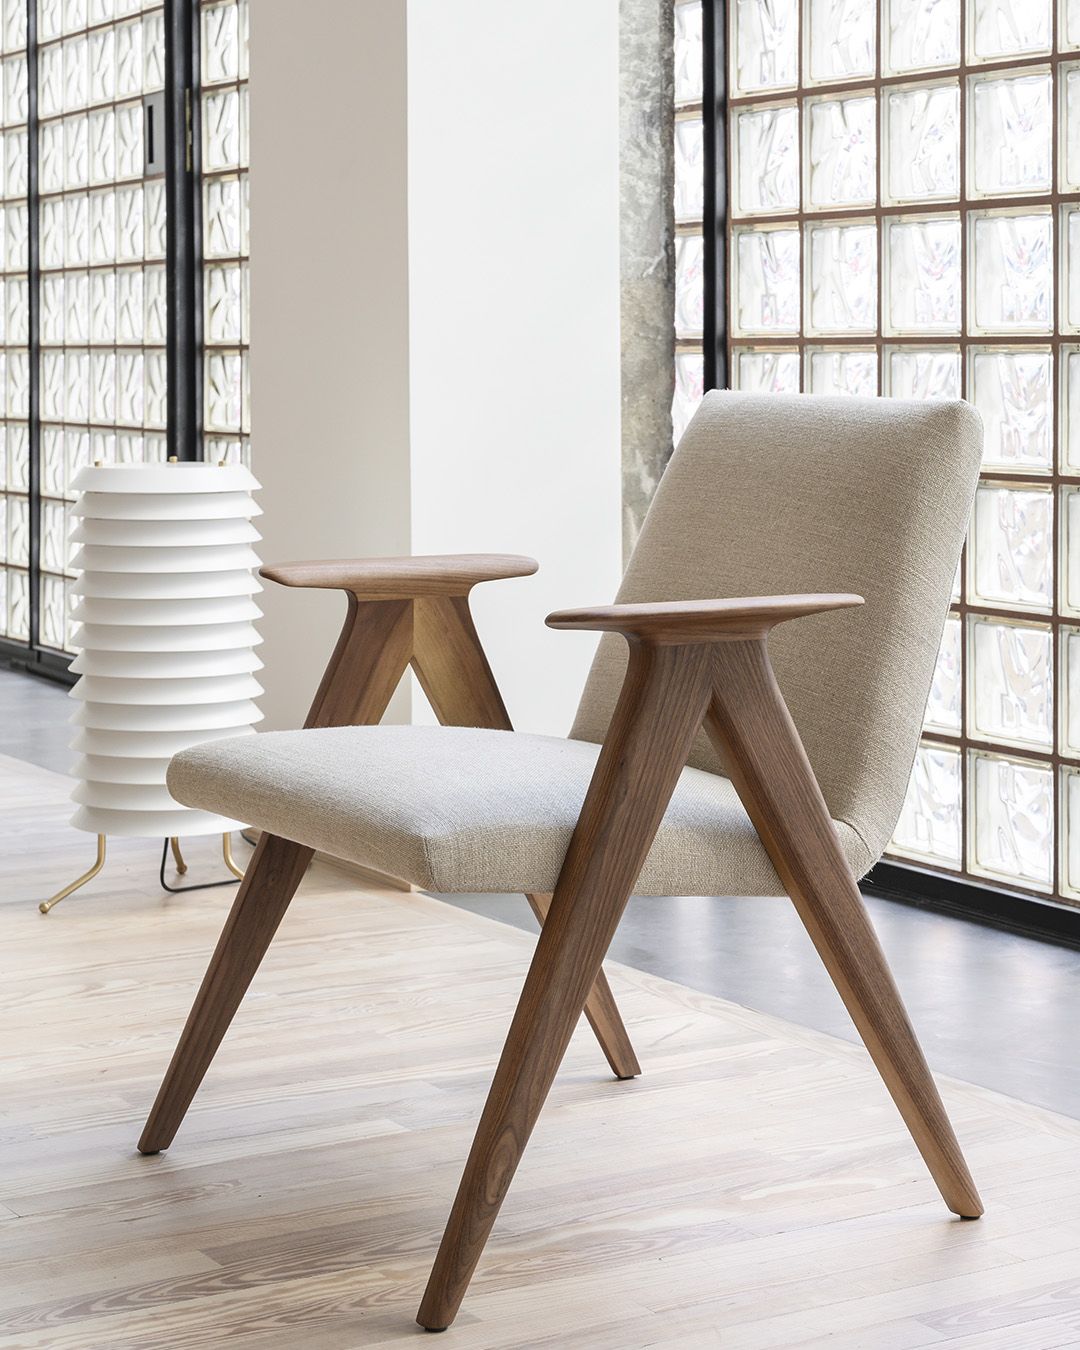 Chair design: for great comfort